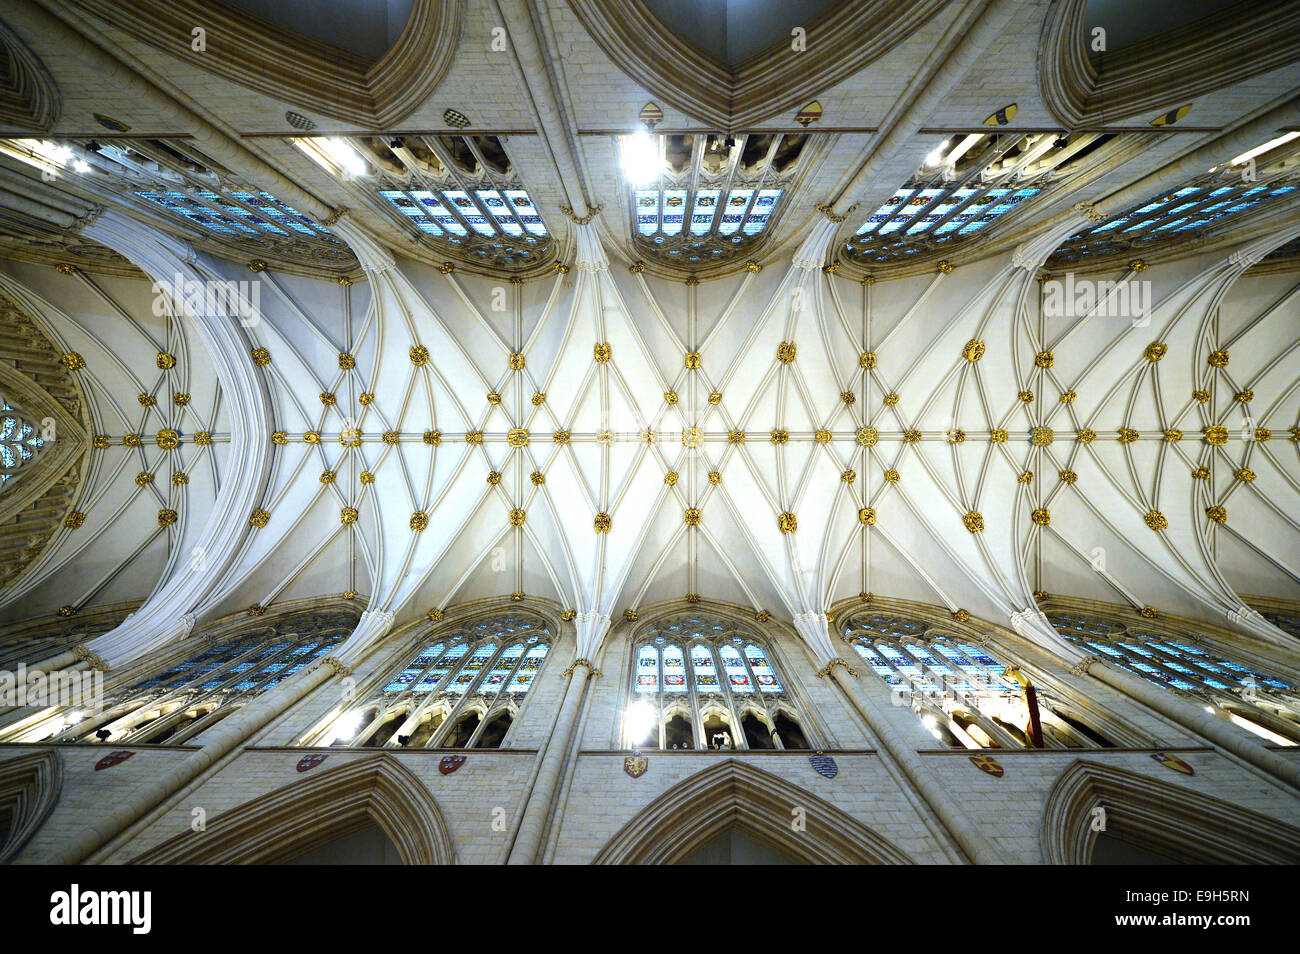 Net vaulting in the nave, York Minster, York, North Yorkshire, England, United Kingdom Stock Photo